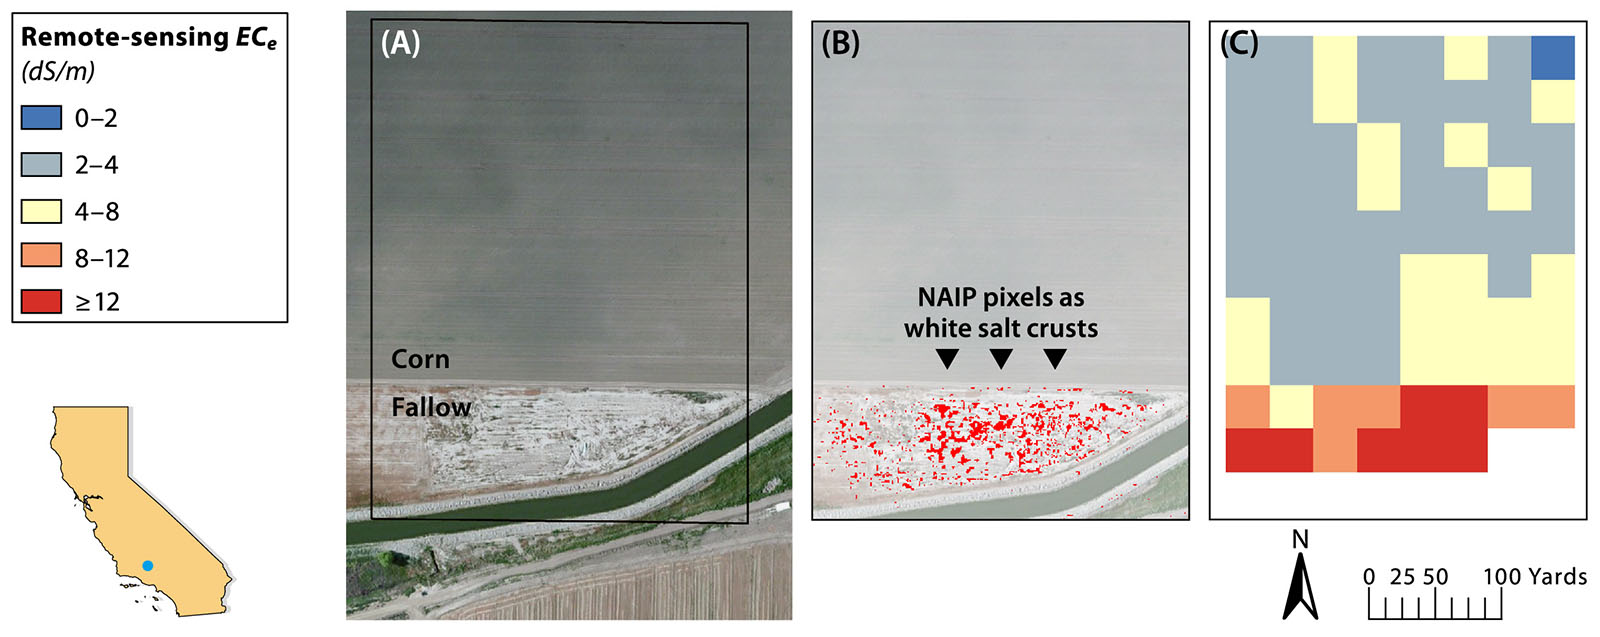 (A) National Aerial Imagery Program (NAIP) 2014 image of a site in Bakersfield (Kern County), where the field in the north was cultivated with corn (Zea mays L.) and the field in the south was fallow; (B) NAIP pixels classified as white salt crusts by supervised classification (red pixels); (C) remote-sensing estimations for root zone salinity.